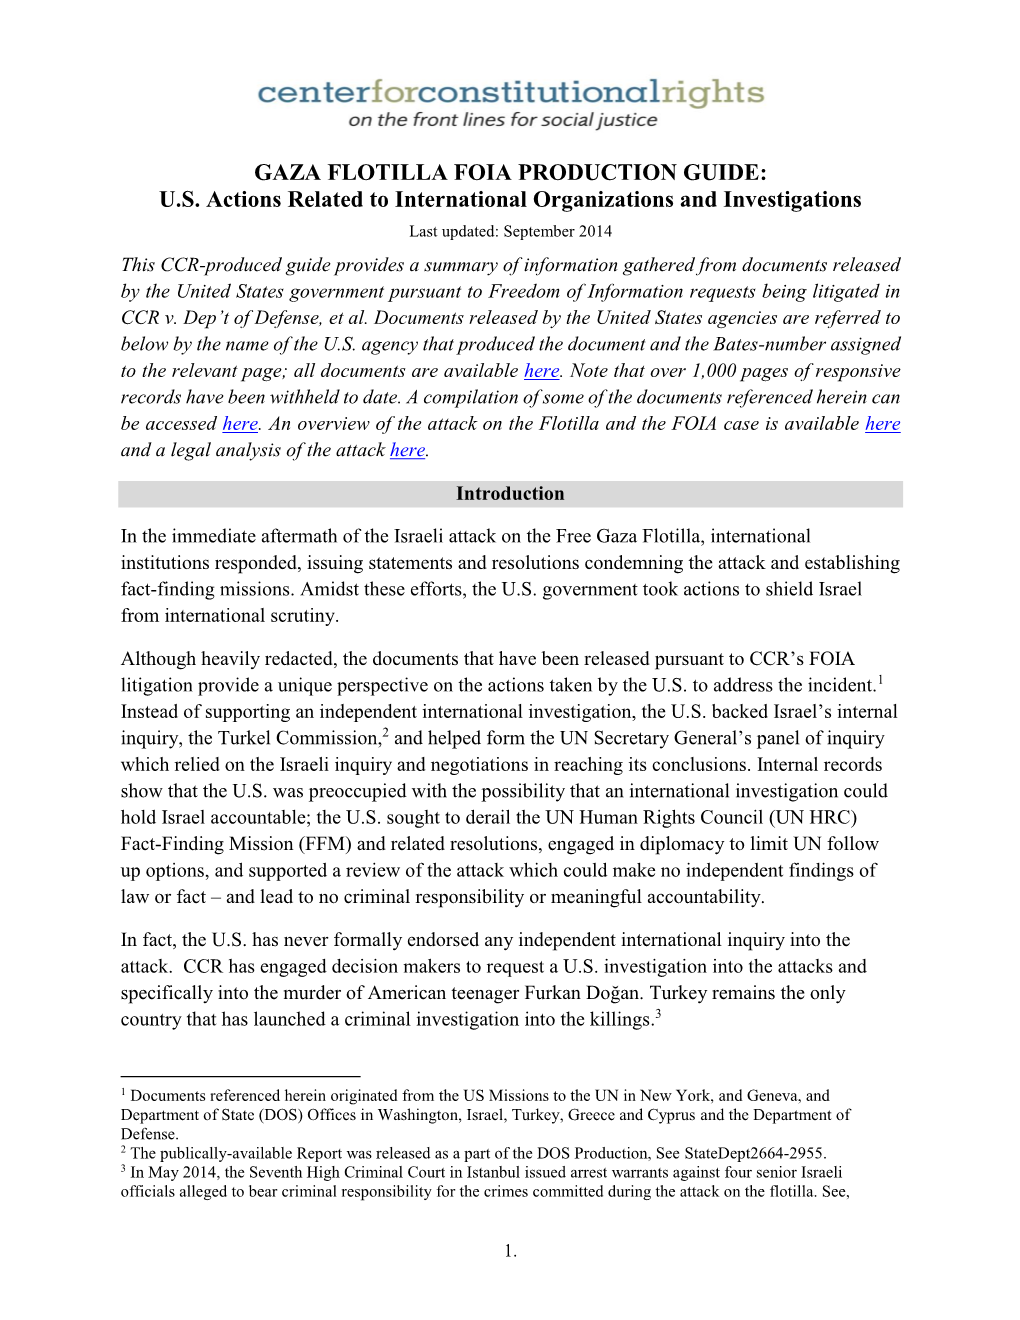 GAZA FLOTILLA FOIA PRODUCTION GUIDE: U.S. Actions Related to International Organizations and Investigations